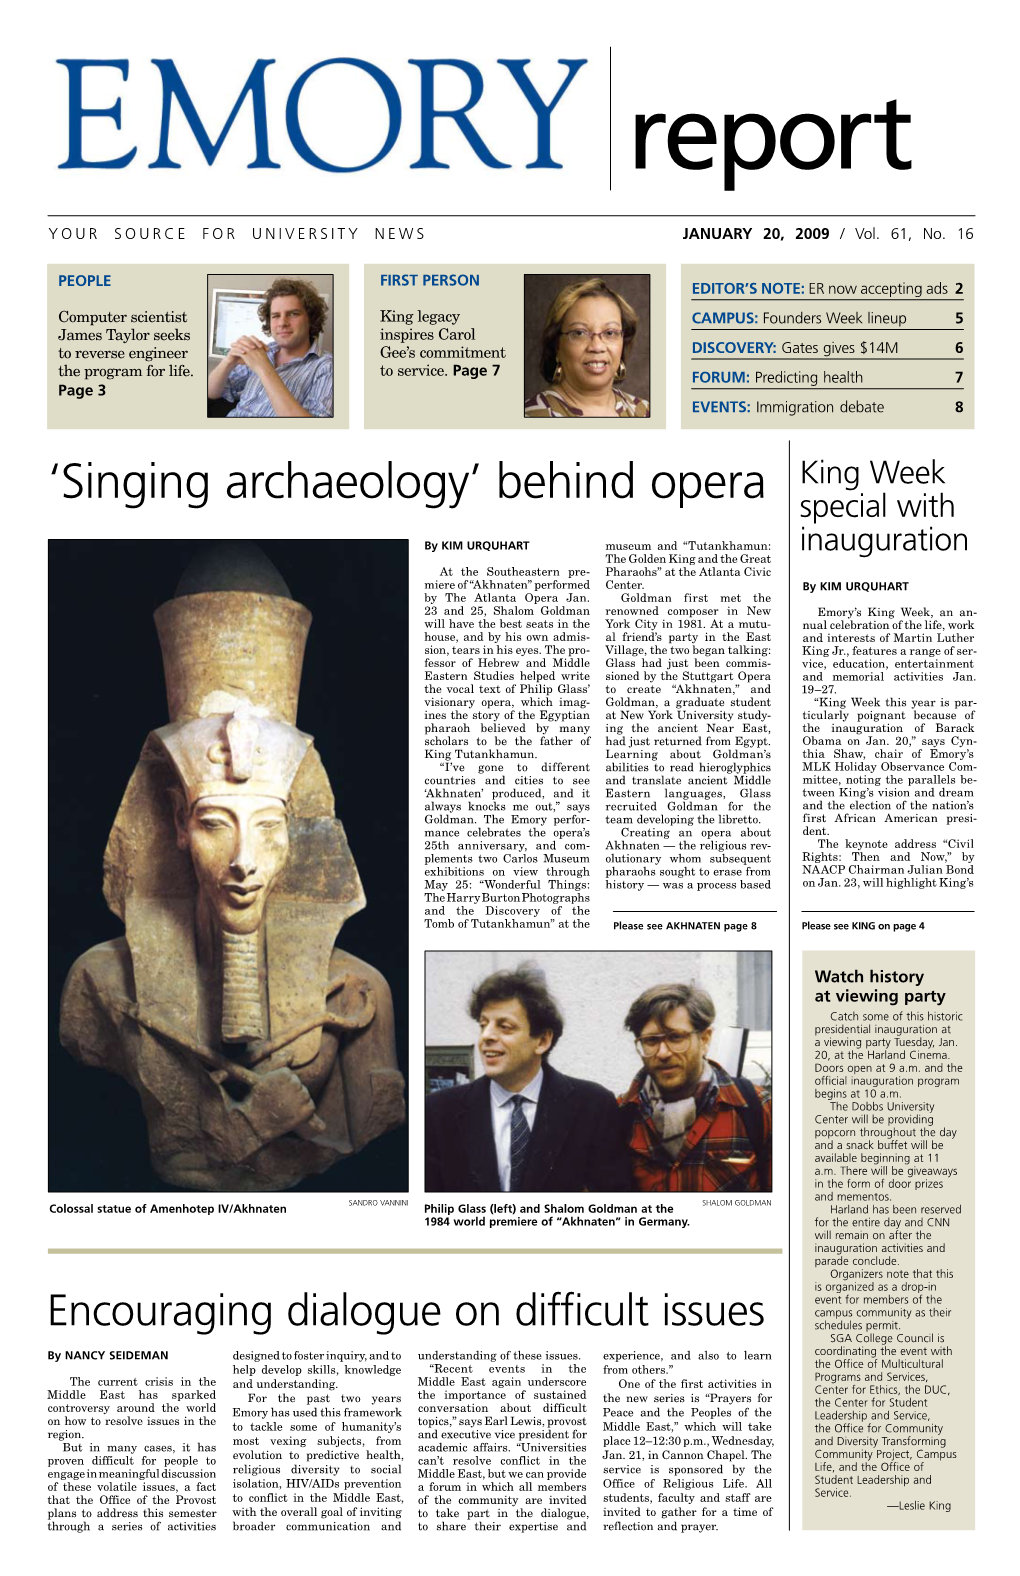 Singing Archaeology’ Behind Opera Special With